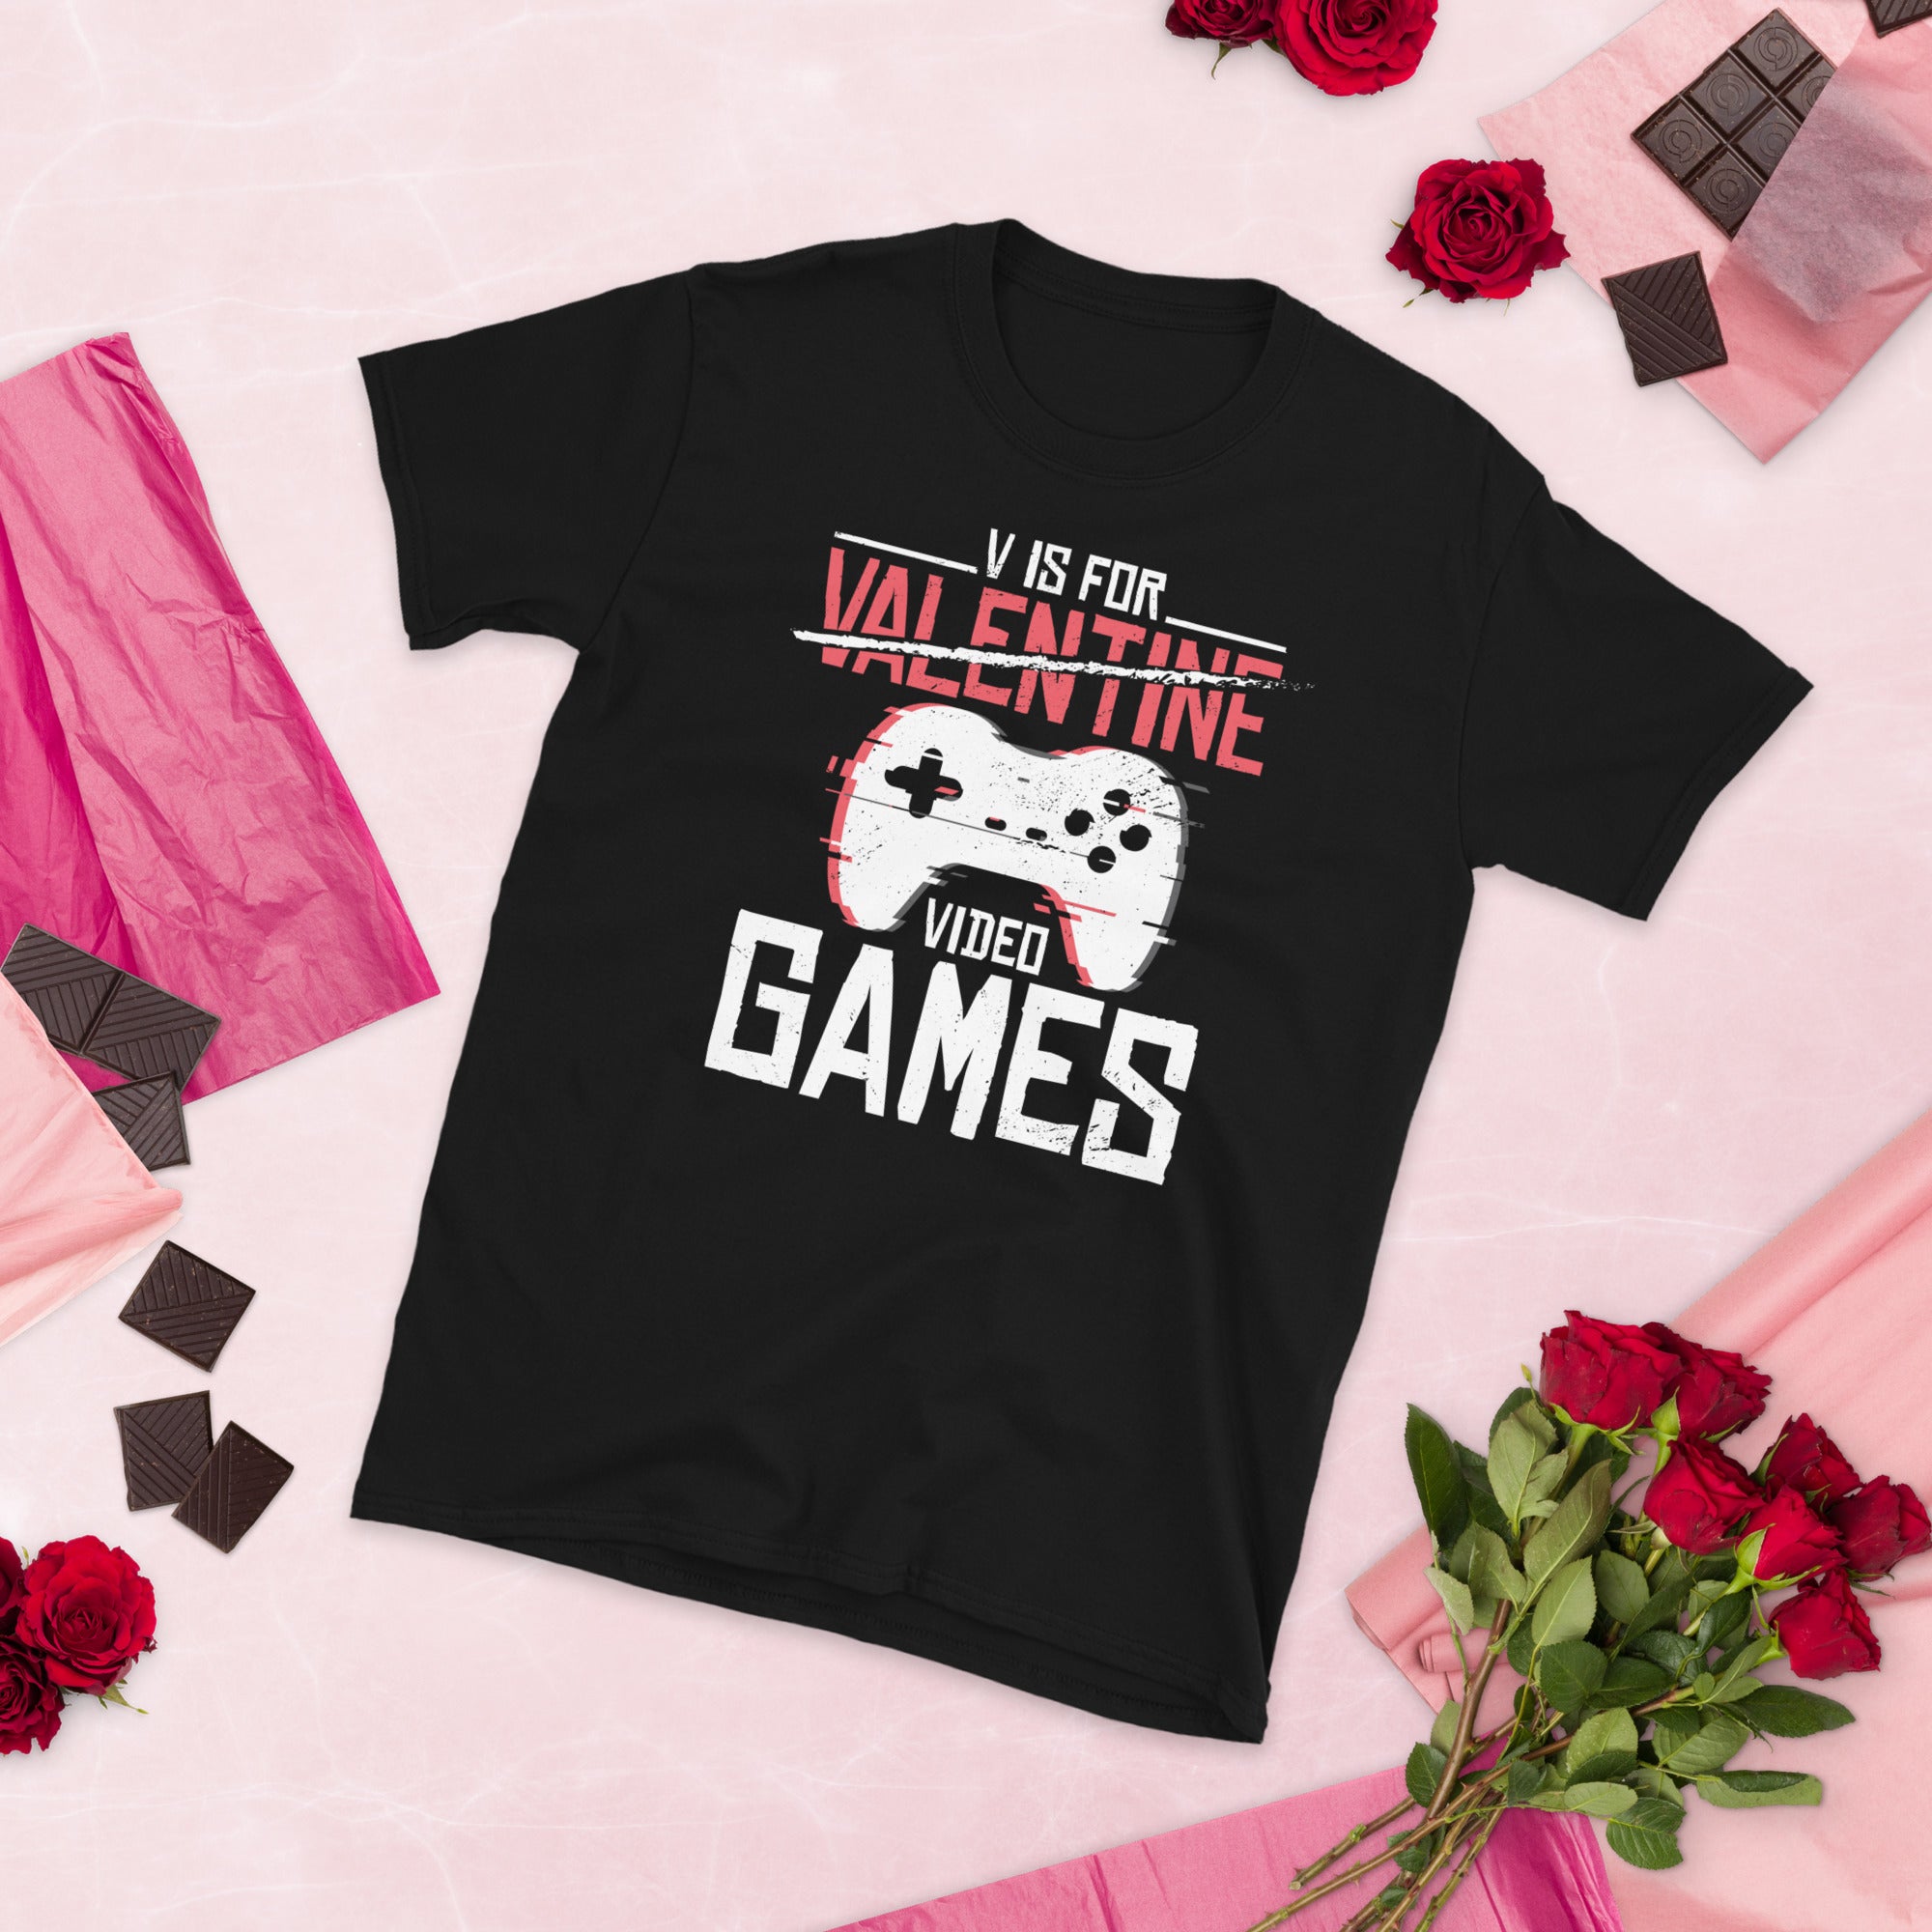 V Is For Video Games Shirt, Video Game Shirt, Gift For Gamer, Game Lover TShirt, Valentines Gaming T Shirt, Funny Gaming Tee, Gamer Gifts - Madeinsea©